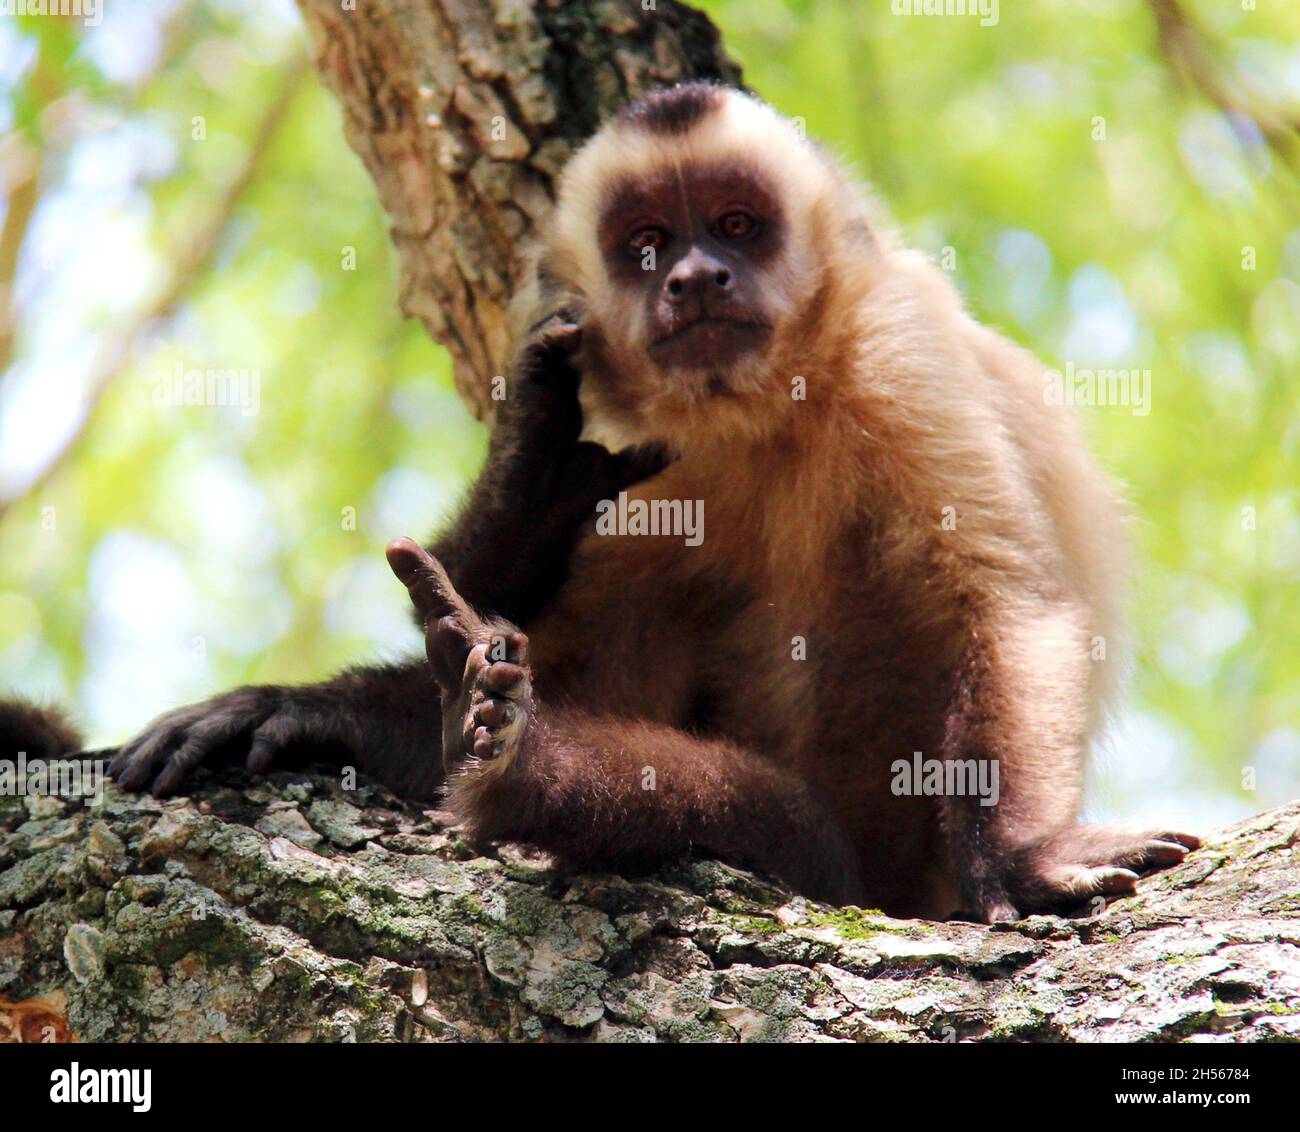 Monkey sitting on a tree trunk, with blurred background. Bonito - Mato Grosso do Sul - Brazil. Stock Photo